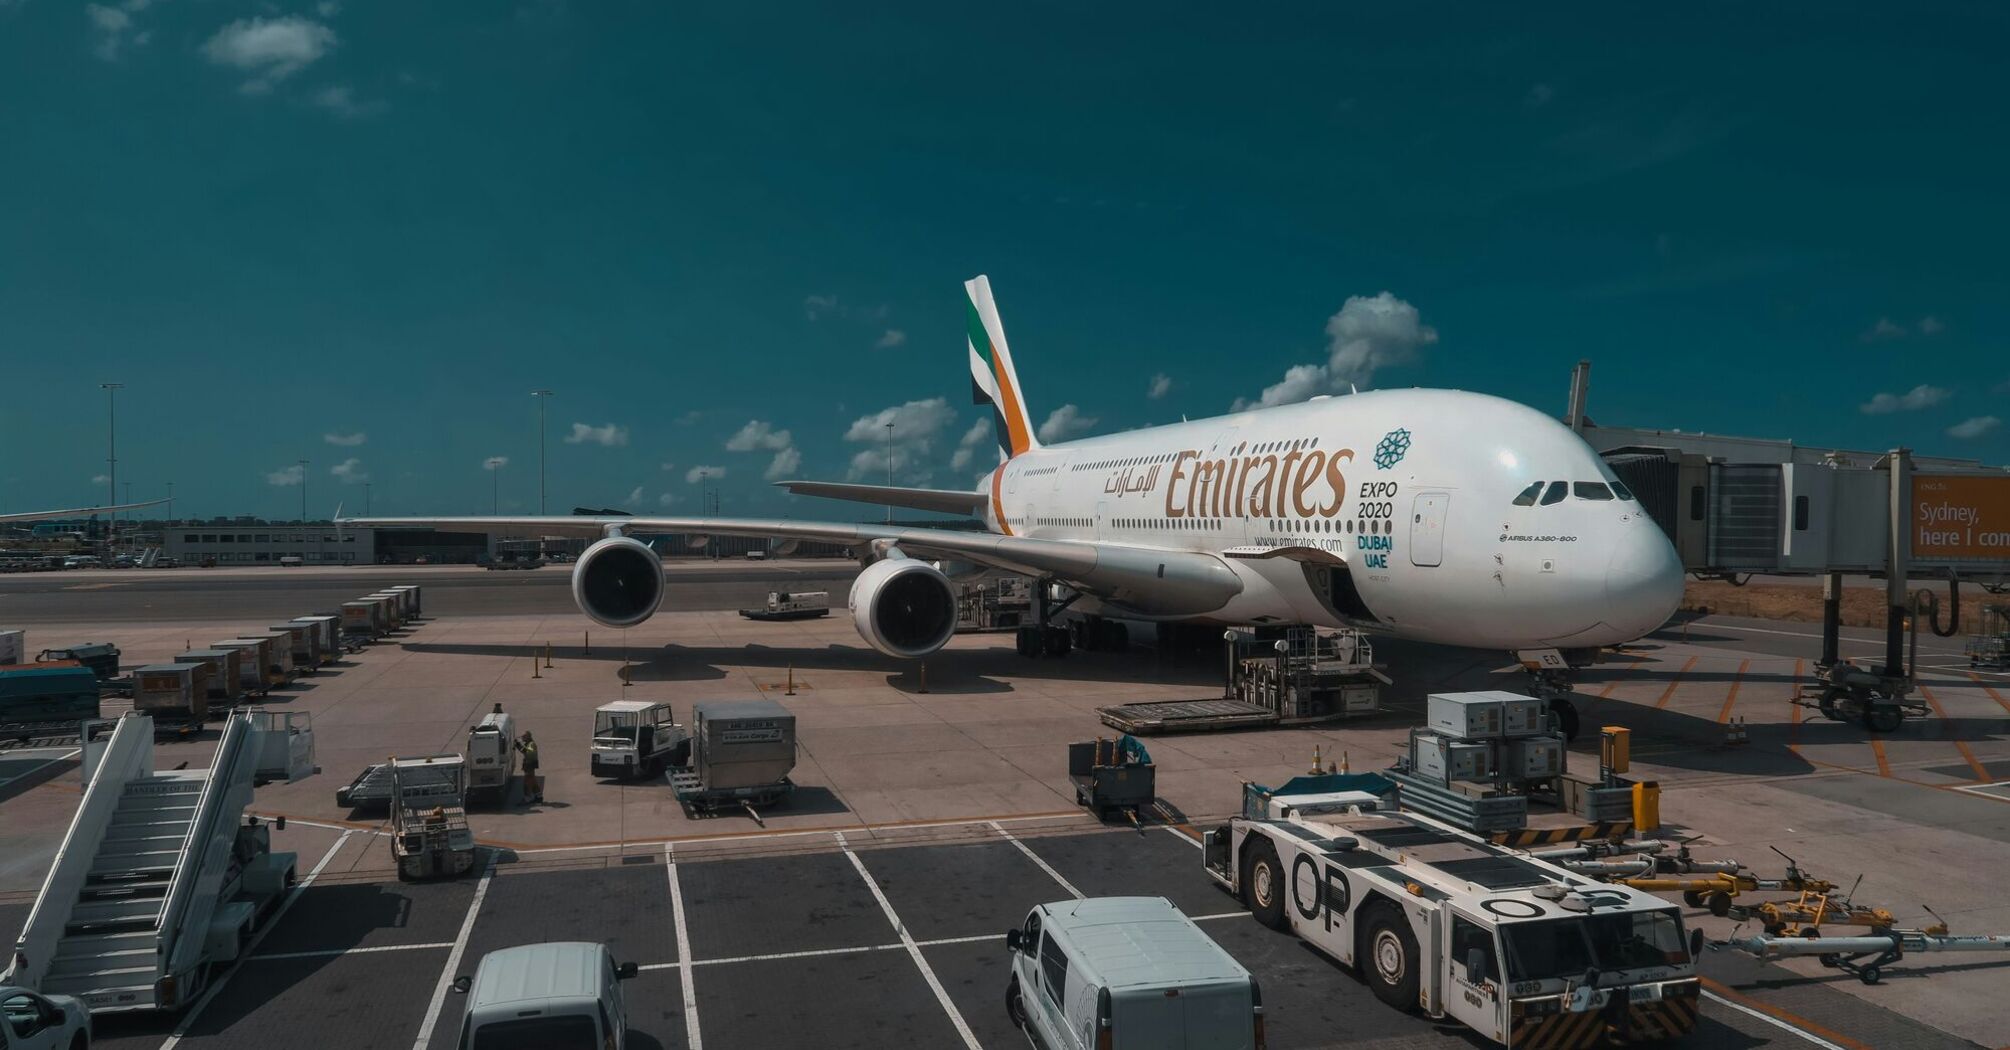 An Emirates Airbus A380 aircraft parked at a gate with ground service equipment and vehicles around it under a partly cloudy sky